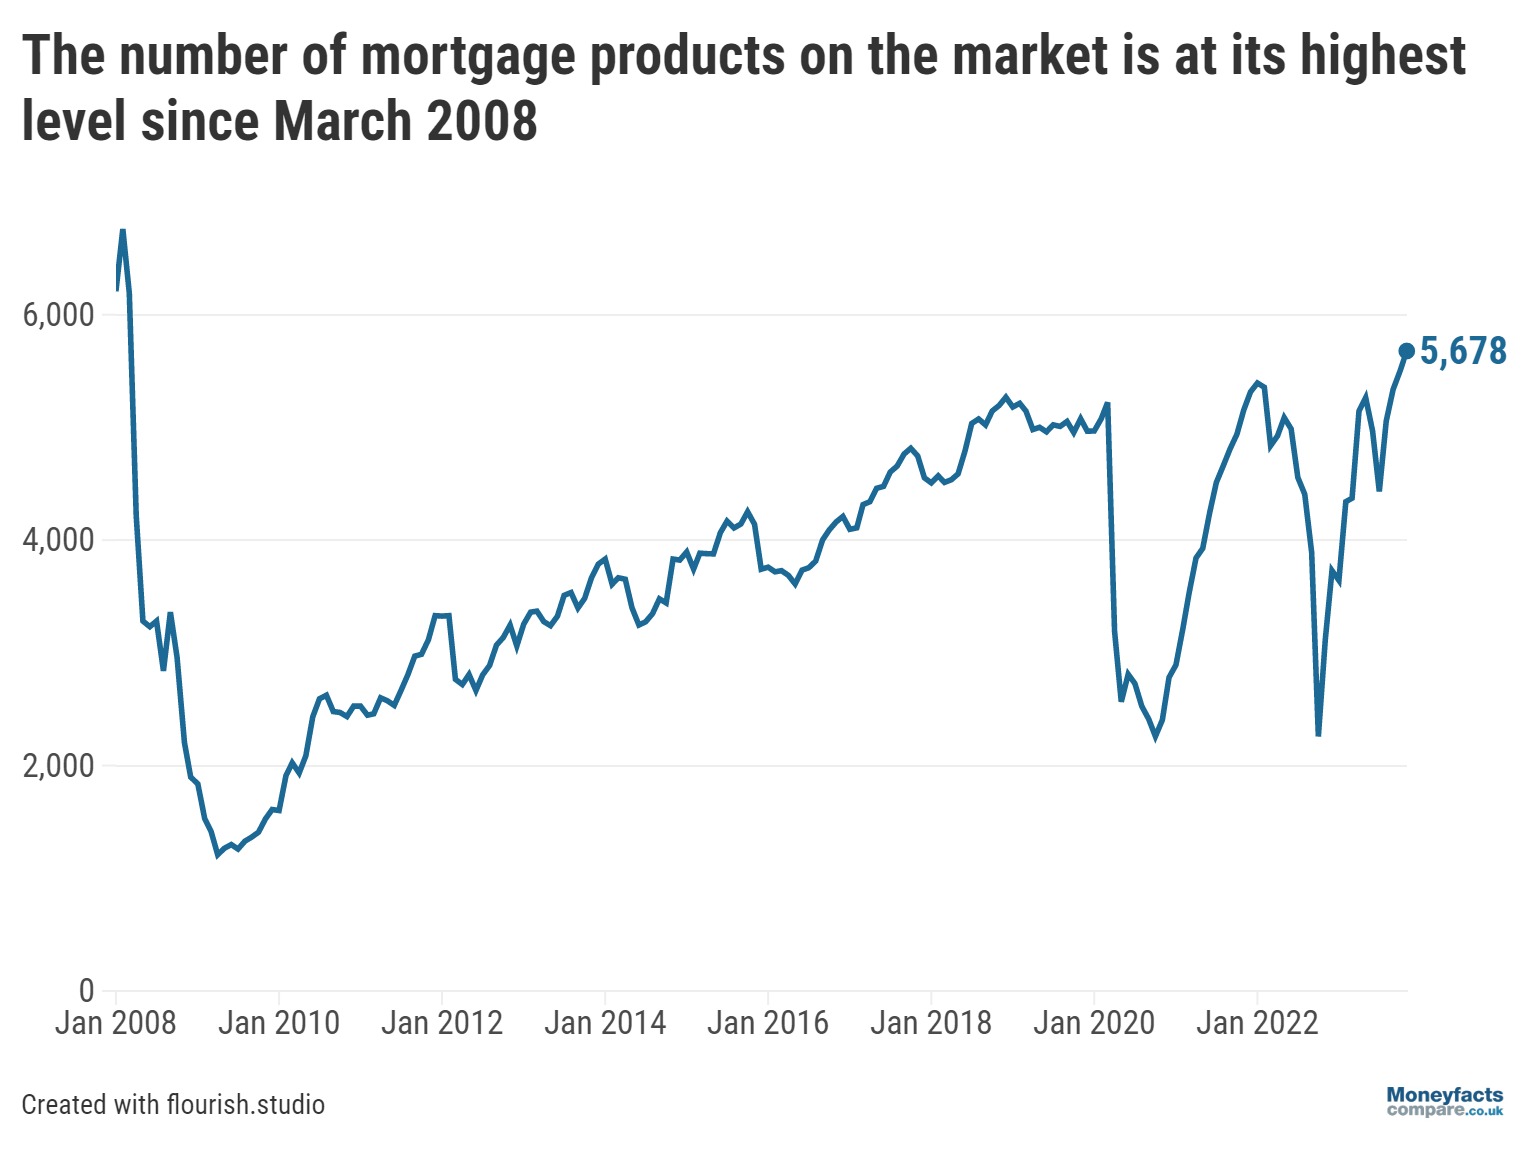 The number of mortgage products on the market is at its highest level since March 2008